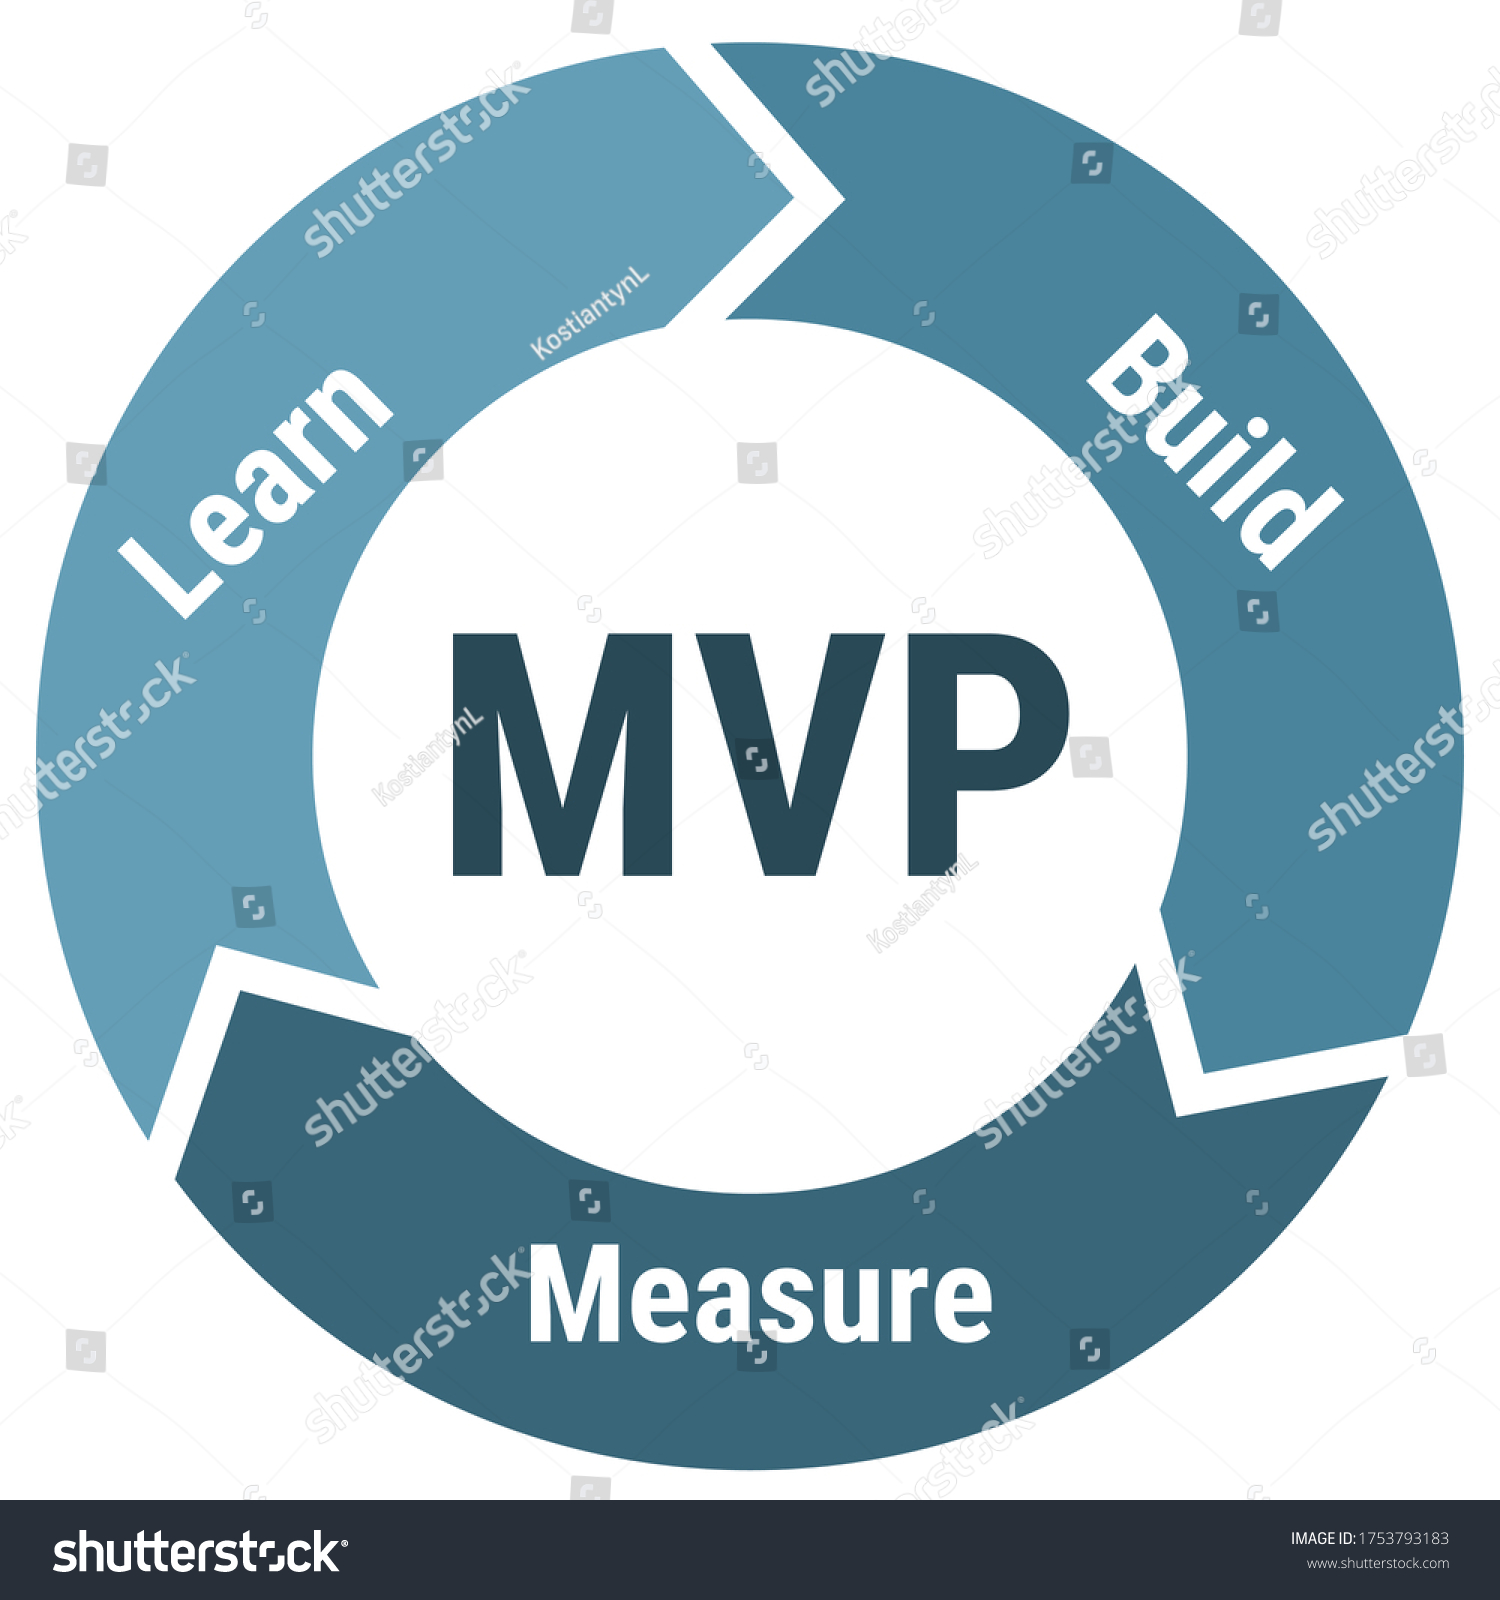 Minimum viable product scheme infographics for presentations and reports, blue on white background #1753793183